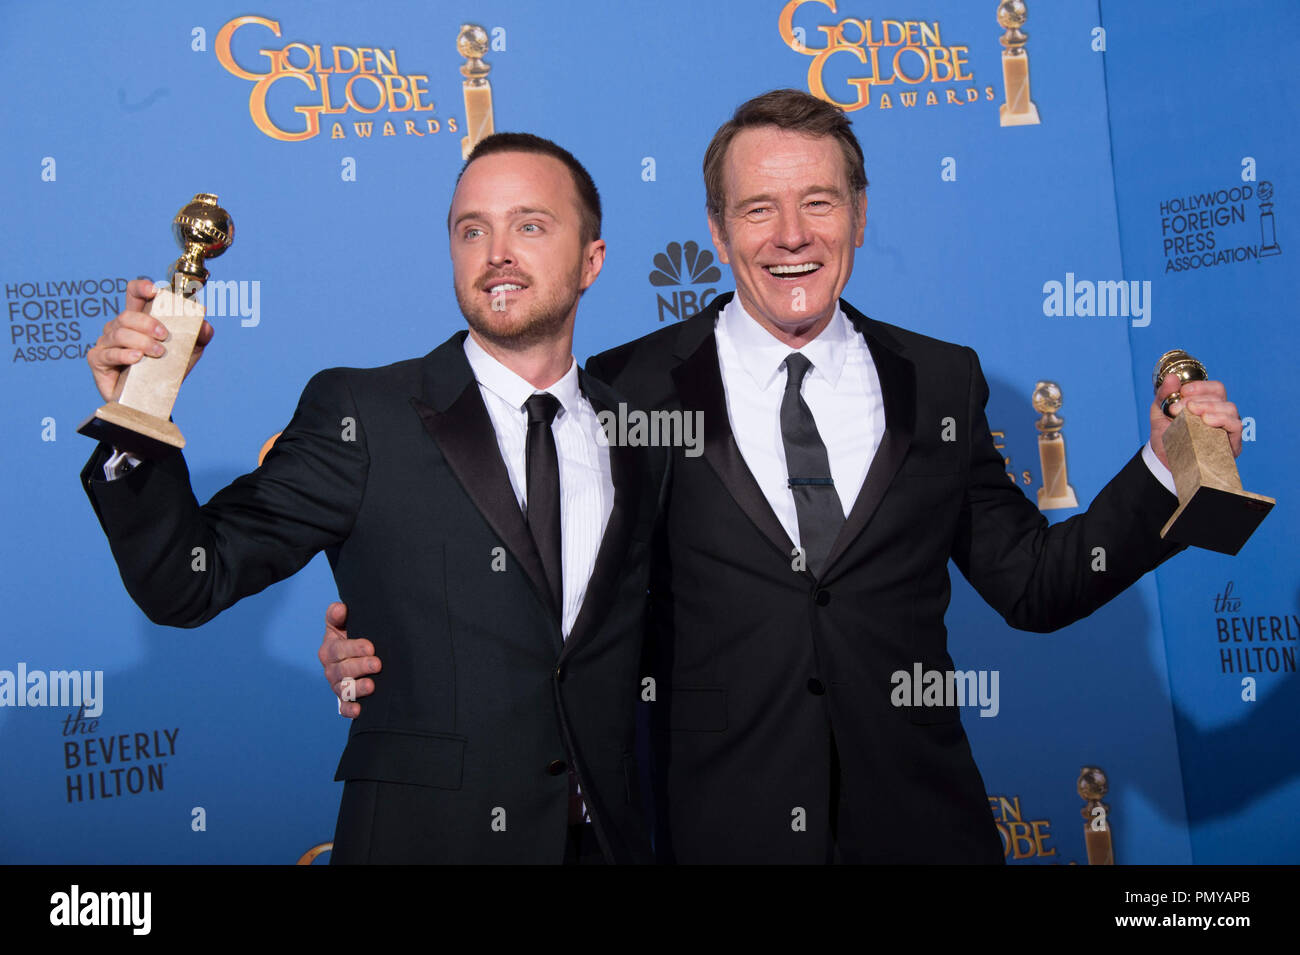 For BEST TELEVISION SERIES – DRAMA, the Golden Globe is awarded to “BREAKING BAD” (AMC), produced by Sony Pictures Television. Aaron Paul and Bryan Cranston pose with the award backstage in the press room at the 71st Annual Golden Globe Awards at the Beverly Hilton in Beverly Hills, CA on Sunday, January 12, 2014.  File Reference # 32222 379JRC  For Editorial Use Only -  All Rights Reserved Stock Photo